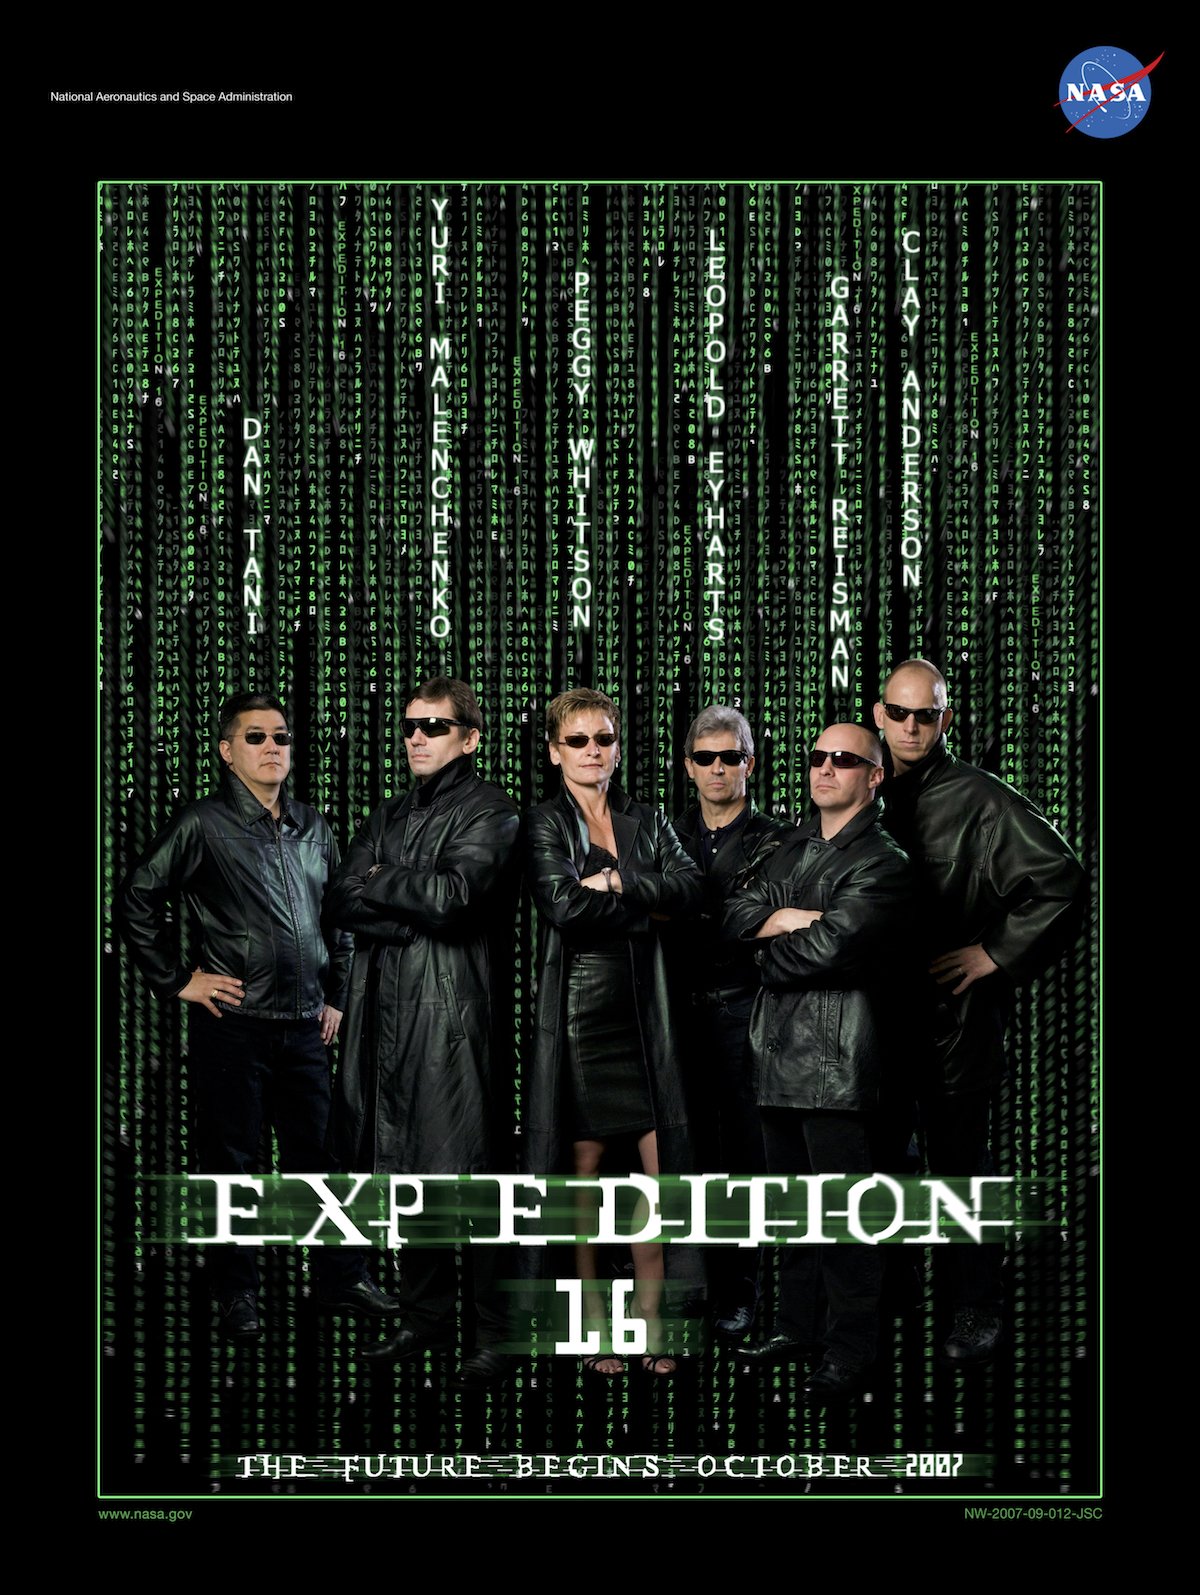 the-poster-for-expedition-16-2007-was-the-first-time-the-crew-went-with-a-pop-culture-homage-inspired-by-the-matrix